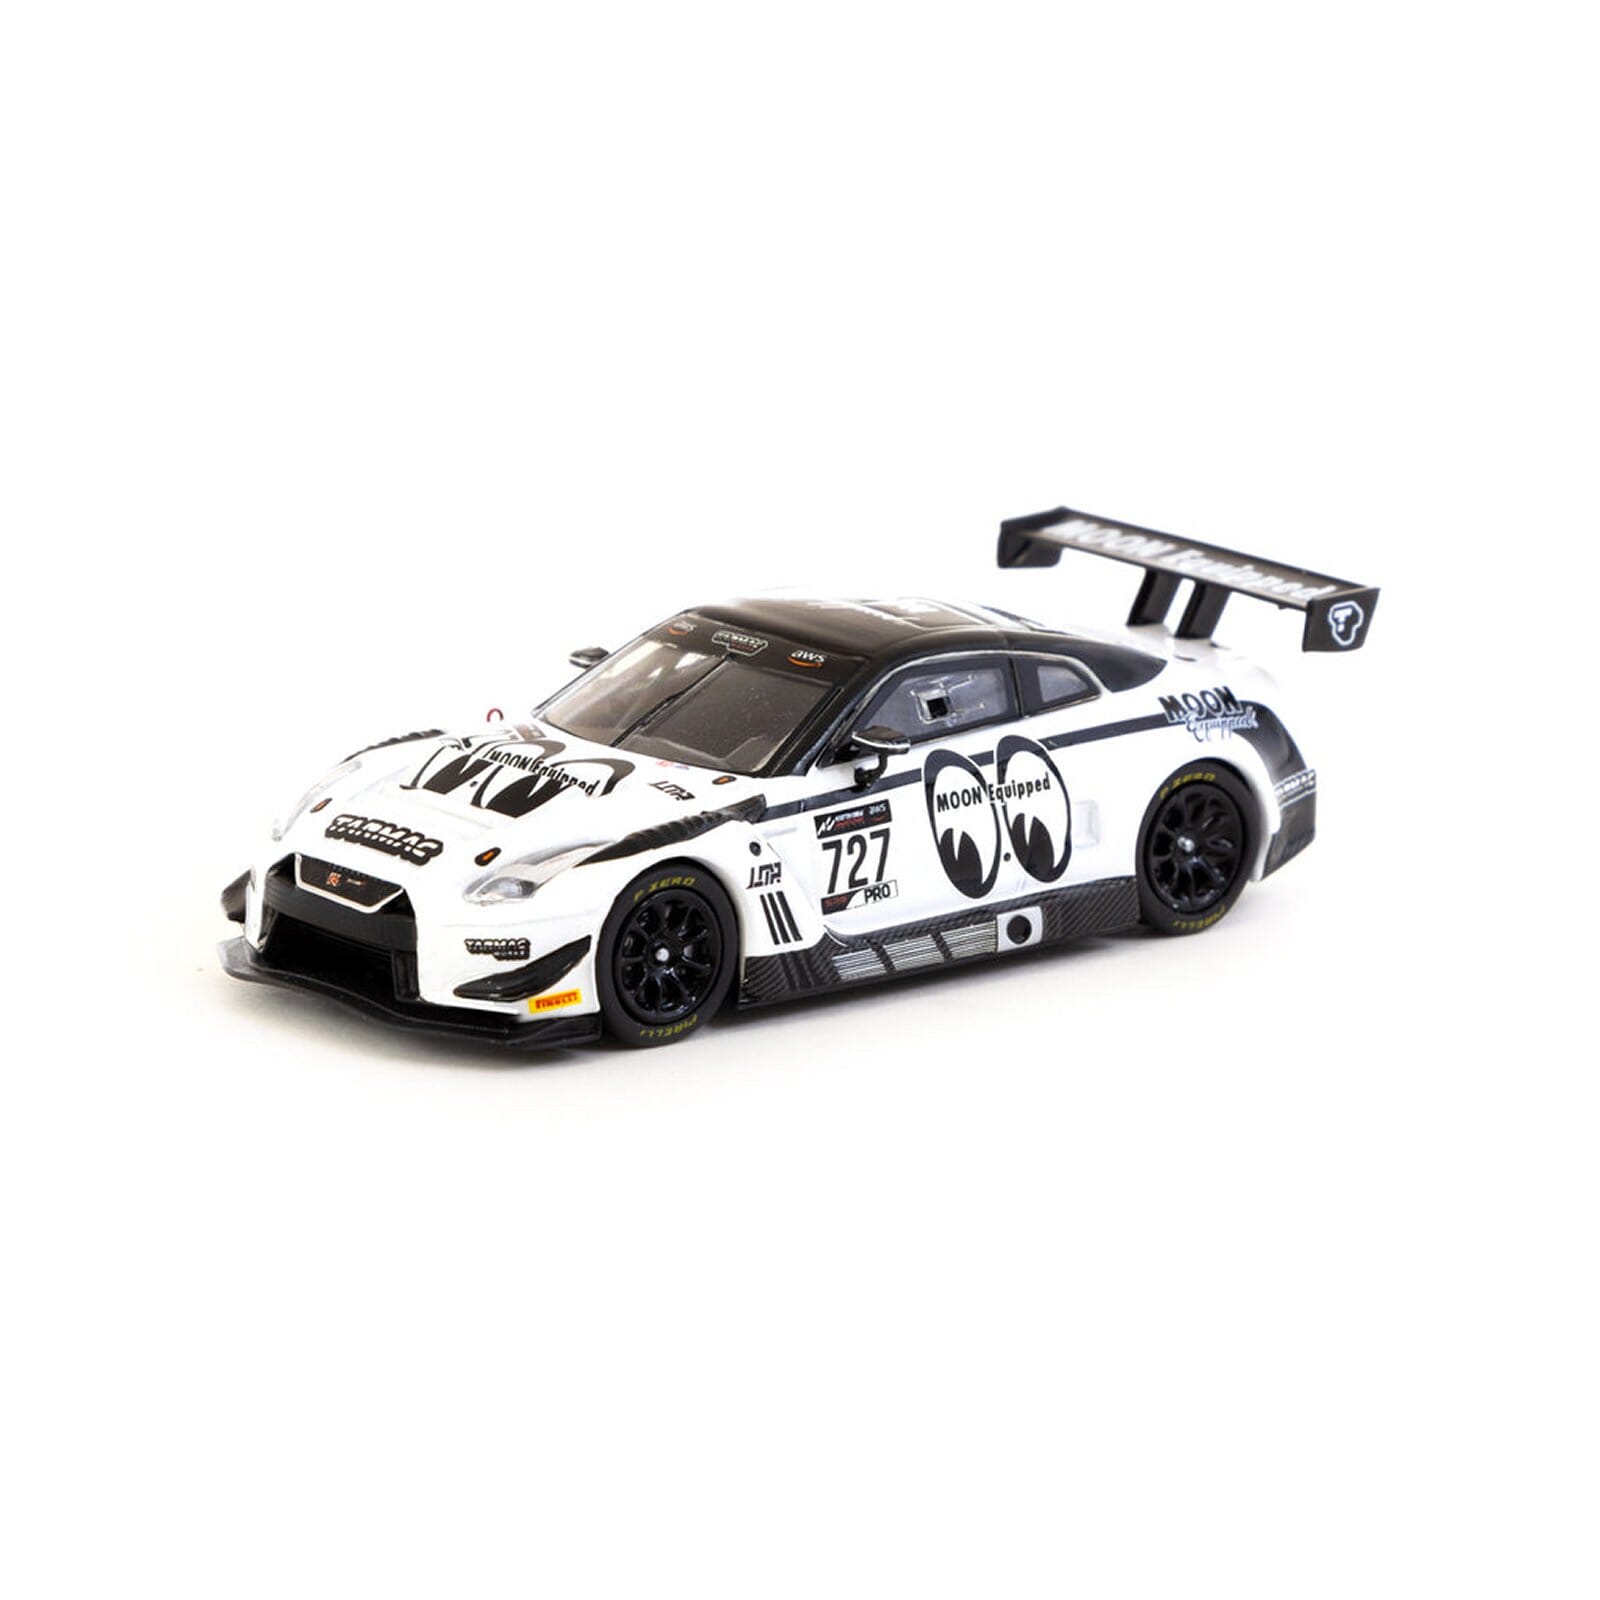 Nissan GT-R Nismo GT3 (Moon Equipped Legion of Racers 2022) in White/Black